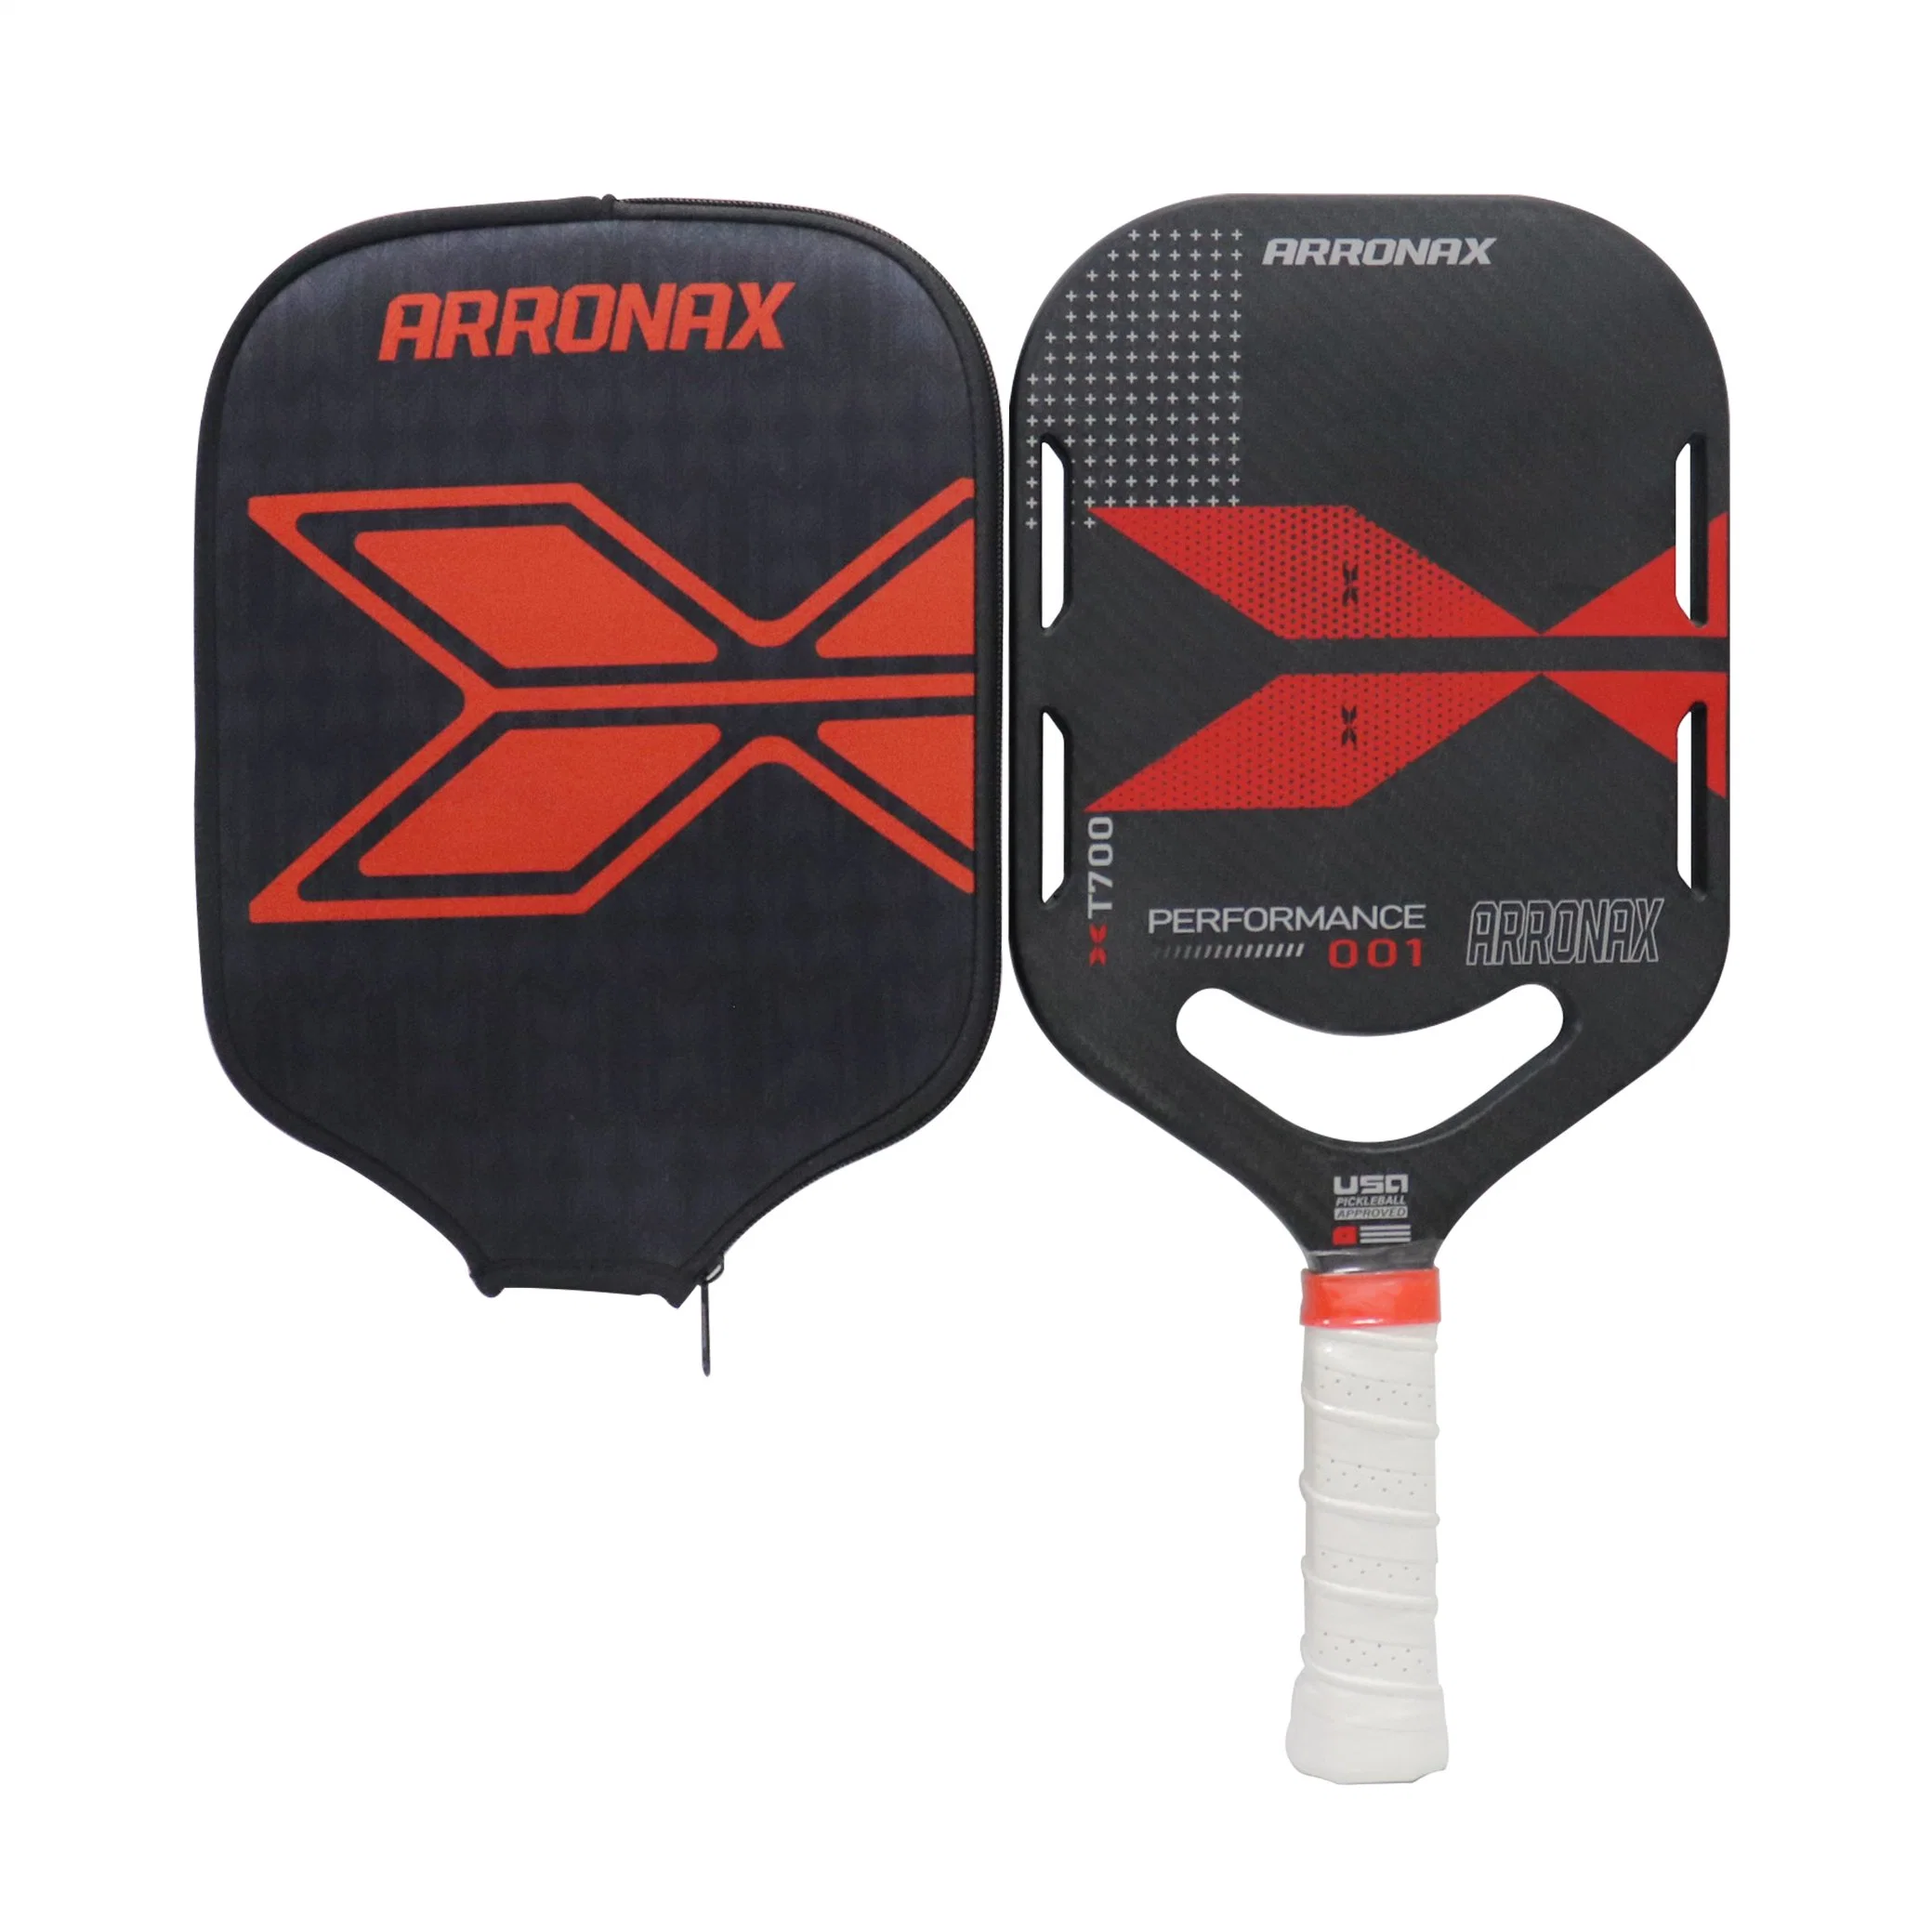 Professional Carbon Fiber Thermoformed Pickleball Paddle Designed for Power with Cover Bag